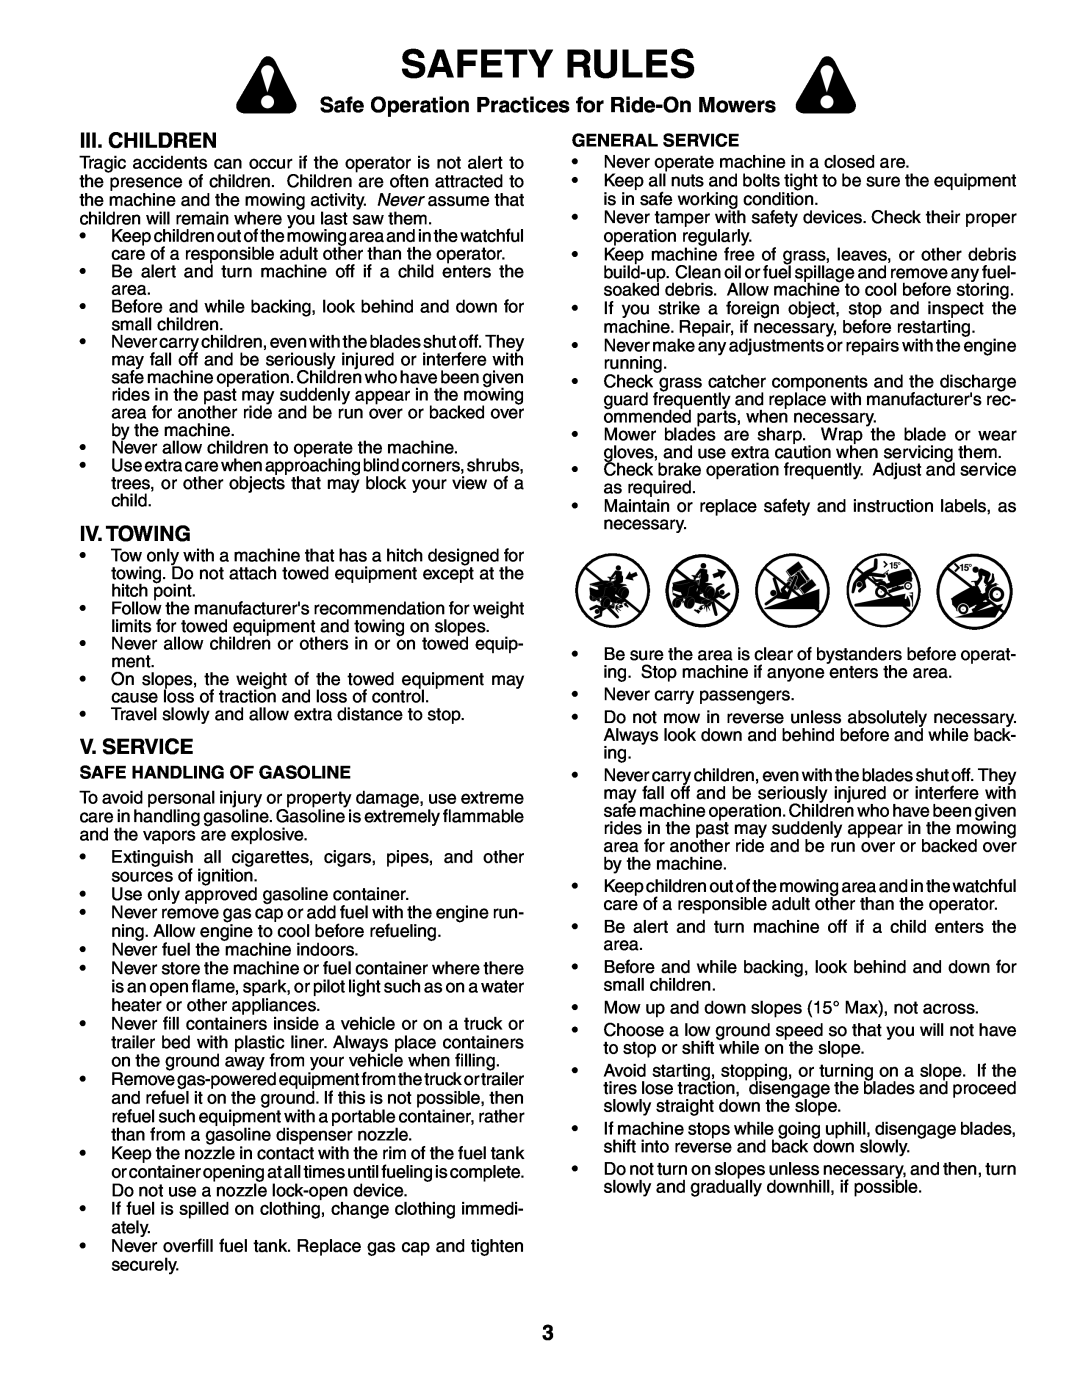 Weed Eater 195013 manual Iii. Children, Iv. Towing, V. Service, Safety Rules, Safe Operation Practices for Ride-On Mowers 